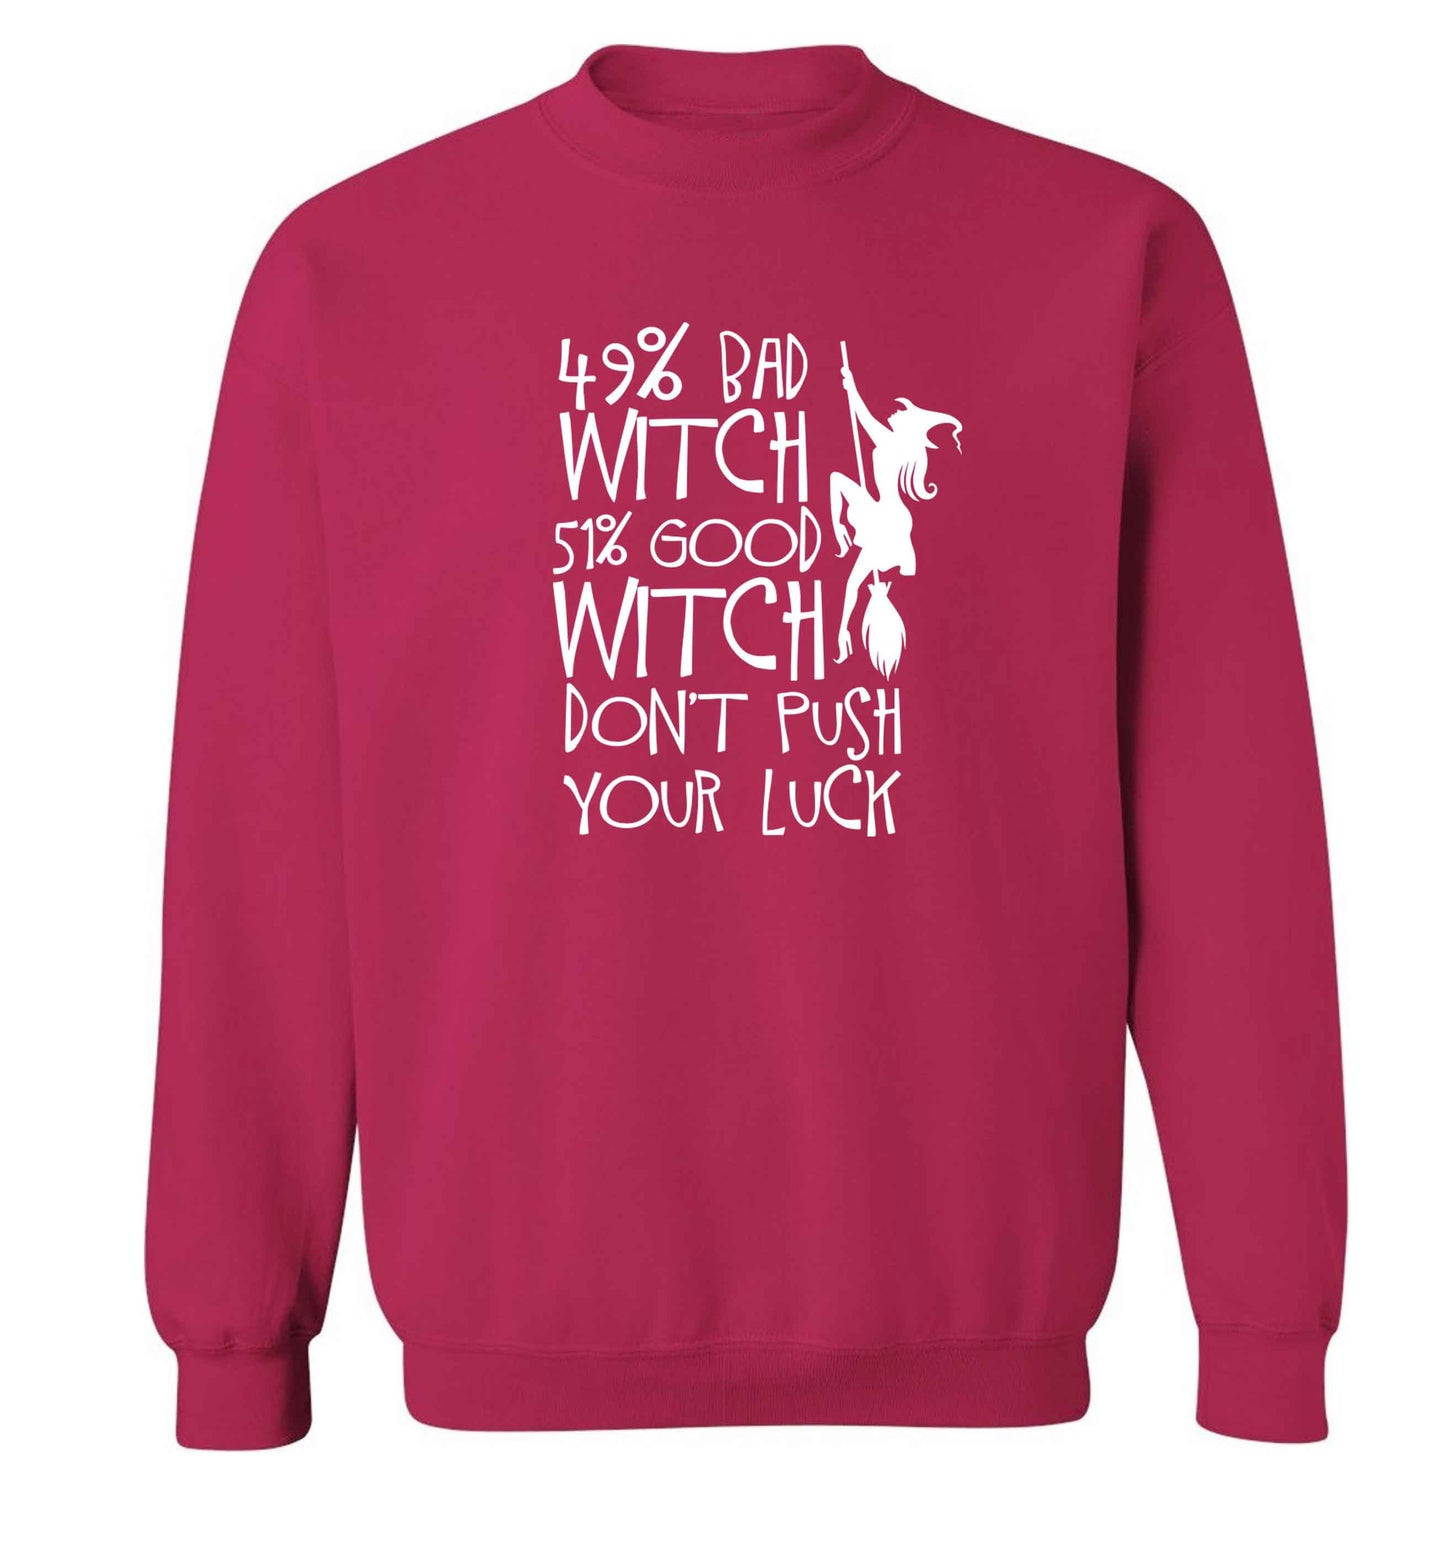 49% bad witch 51% good witch don't push your luck adult's unisex pink sweater 2XL